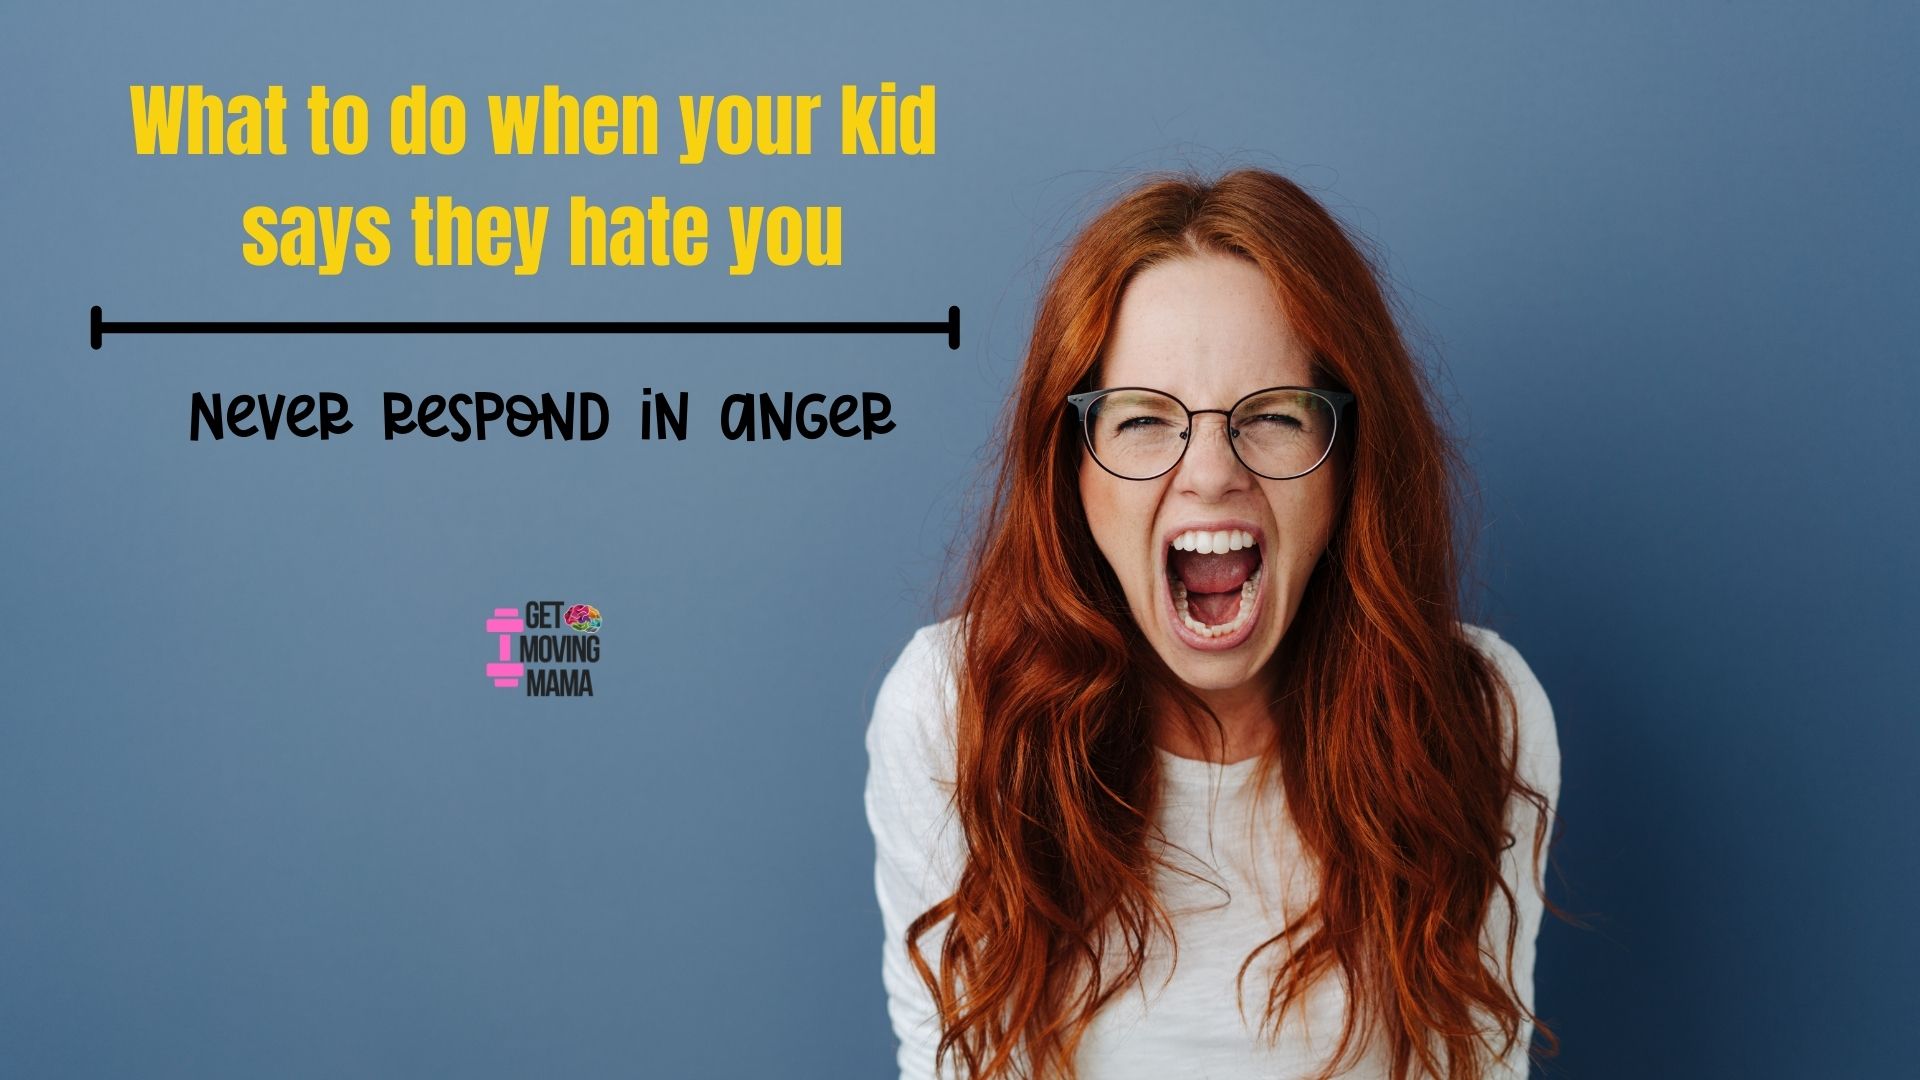 A picture of a woman with red hair yelling with a blue background and "what to do when your kids says they hate you never respond in anger" in text.